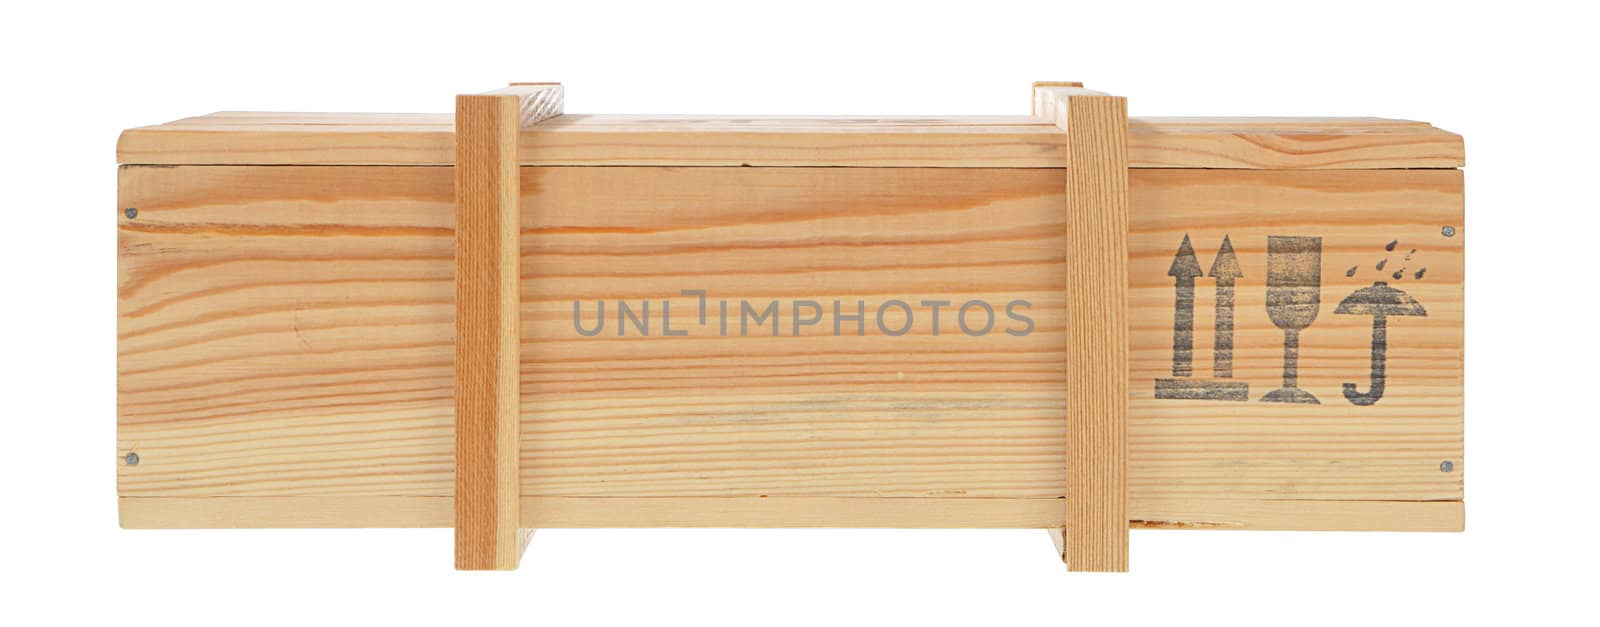 model of a wooden shipping box isolated on white background with clipping paths